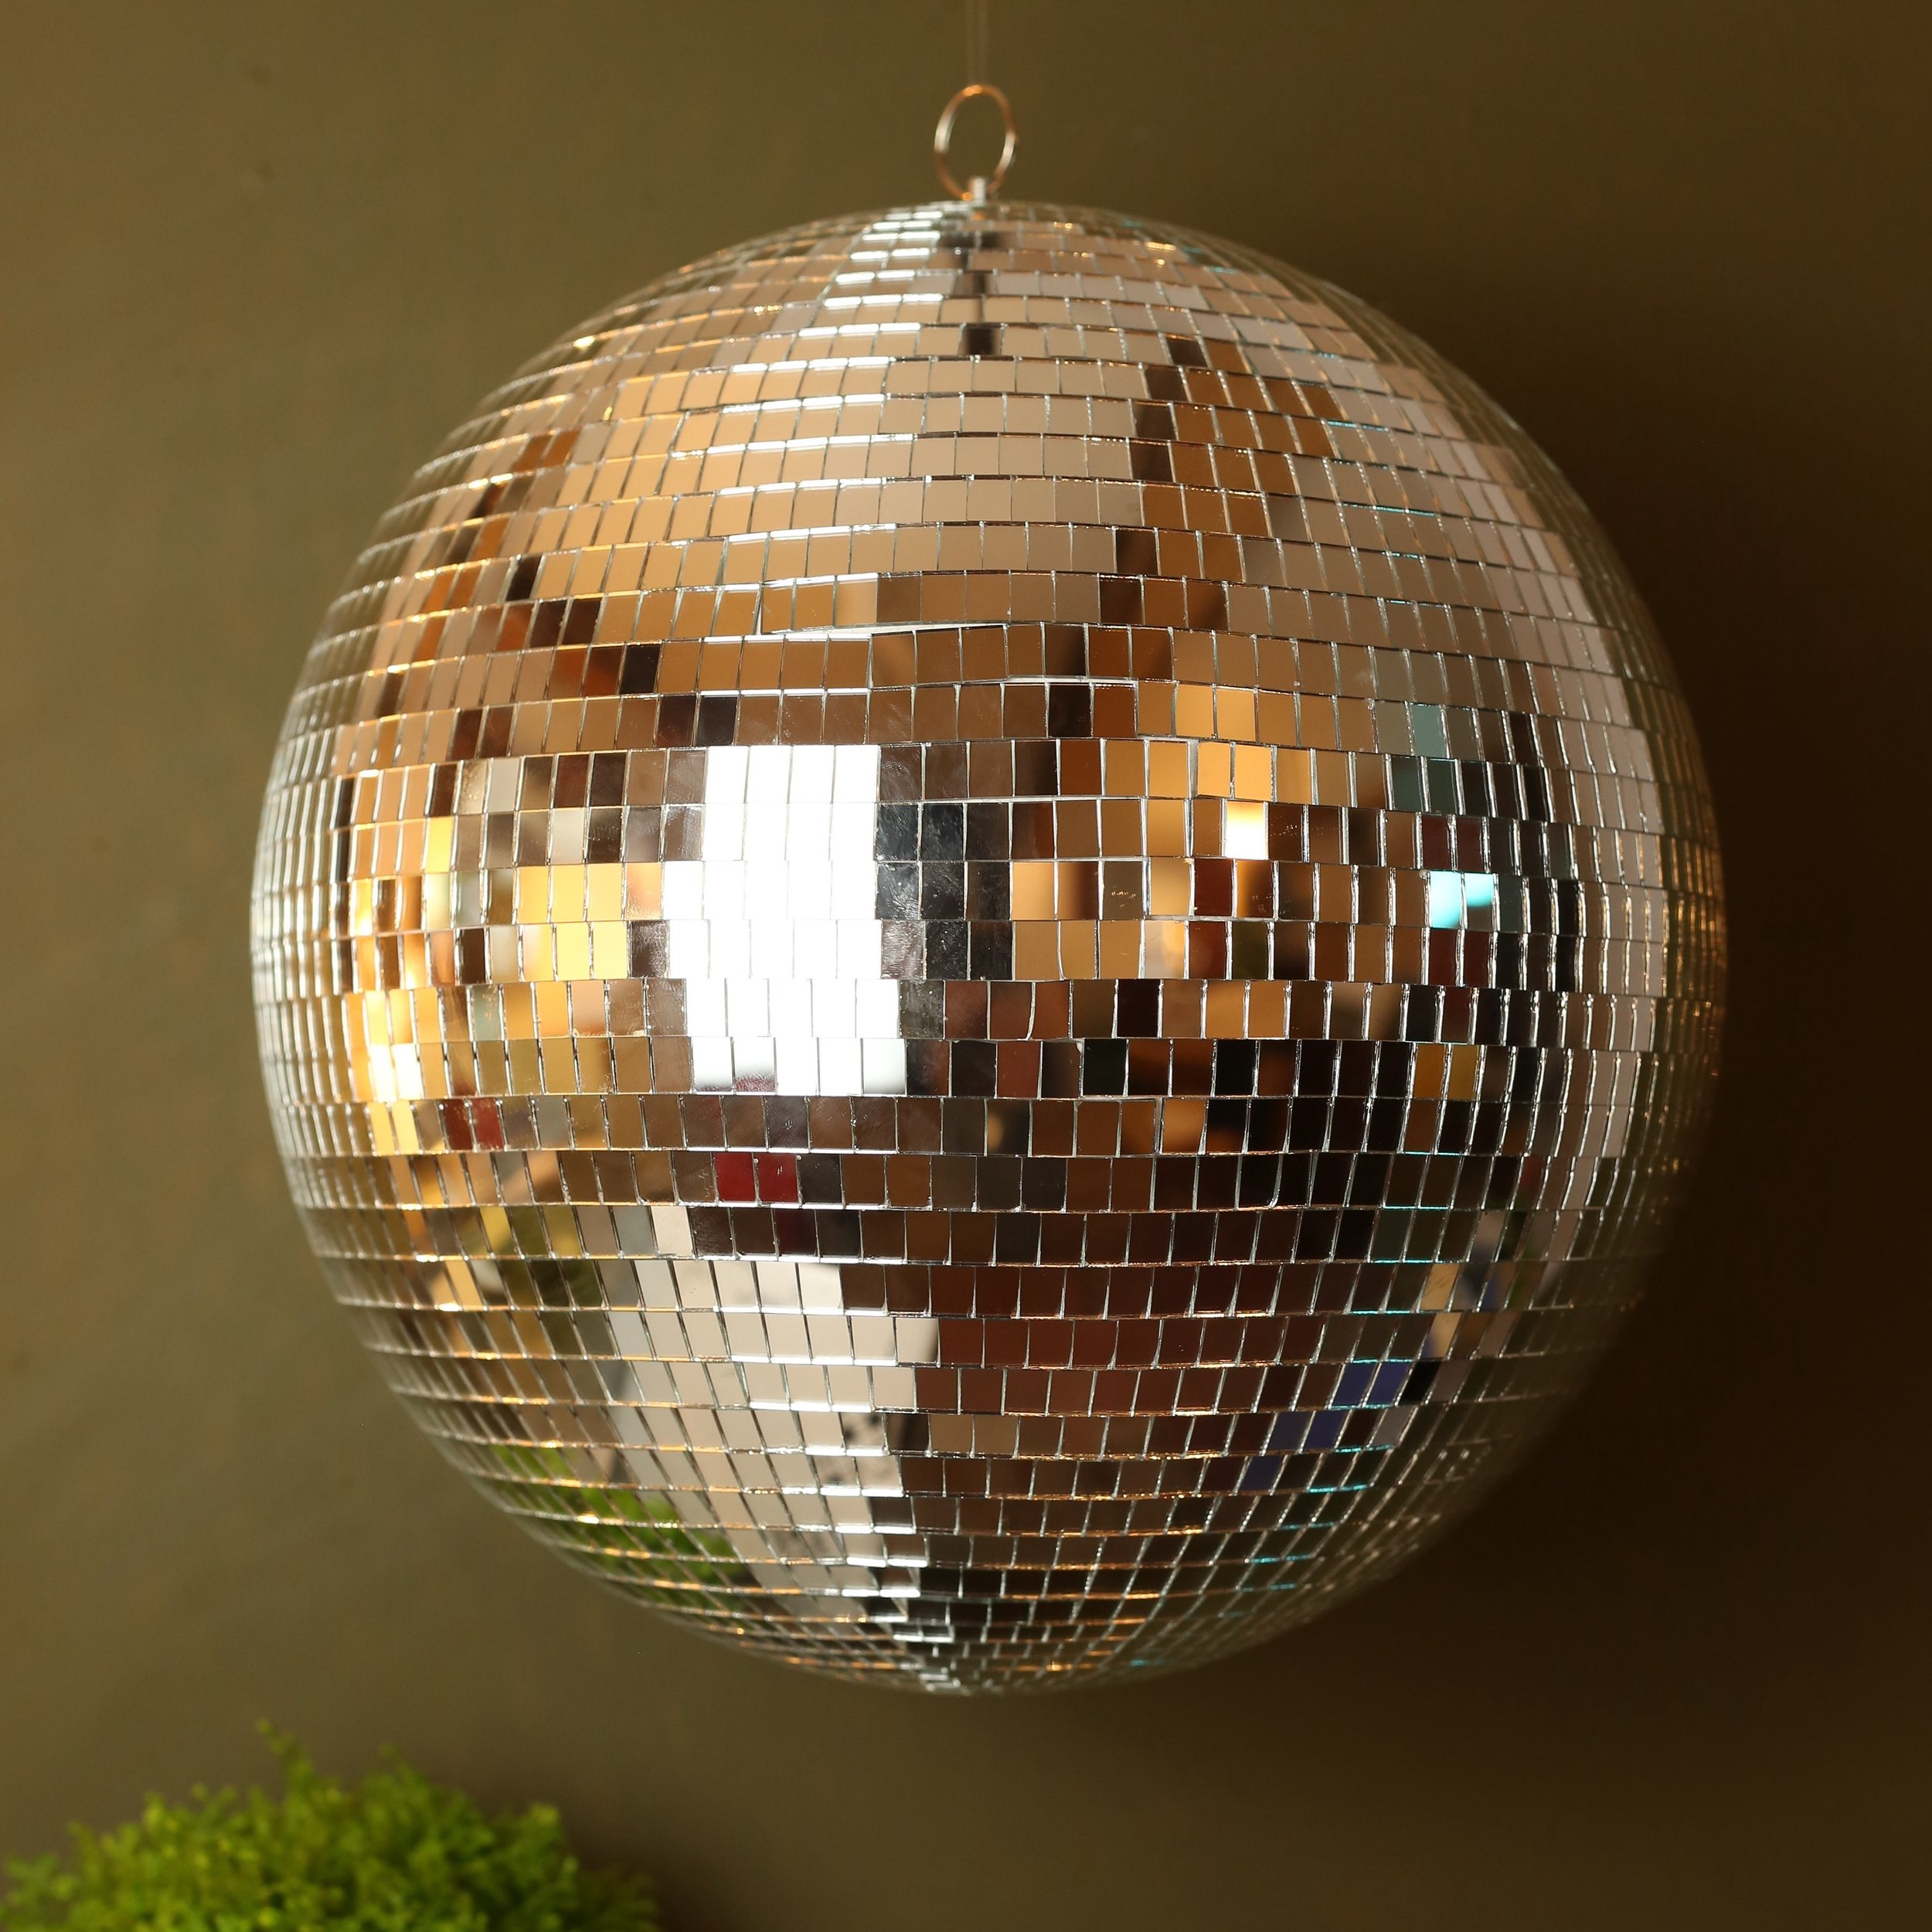 A disco ball a day keeps the therapist away. I'm pretty sure I heard that once. Might have been in the mirror to myself though idk.
Raise your hand if you would put a 16 inch disco ball in your house 🙋&zwj;♀️ 
.
#discoball #retrodecor #maximalistdec